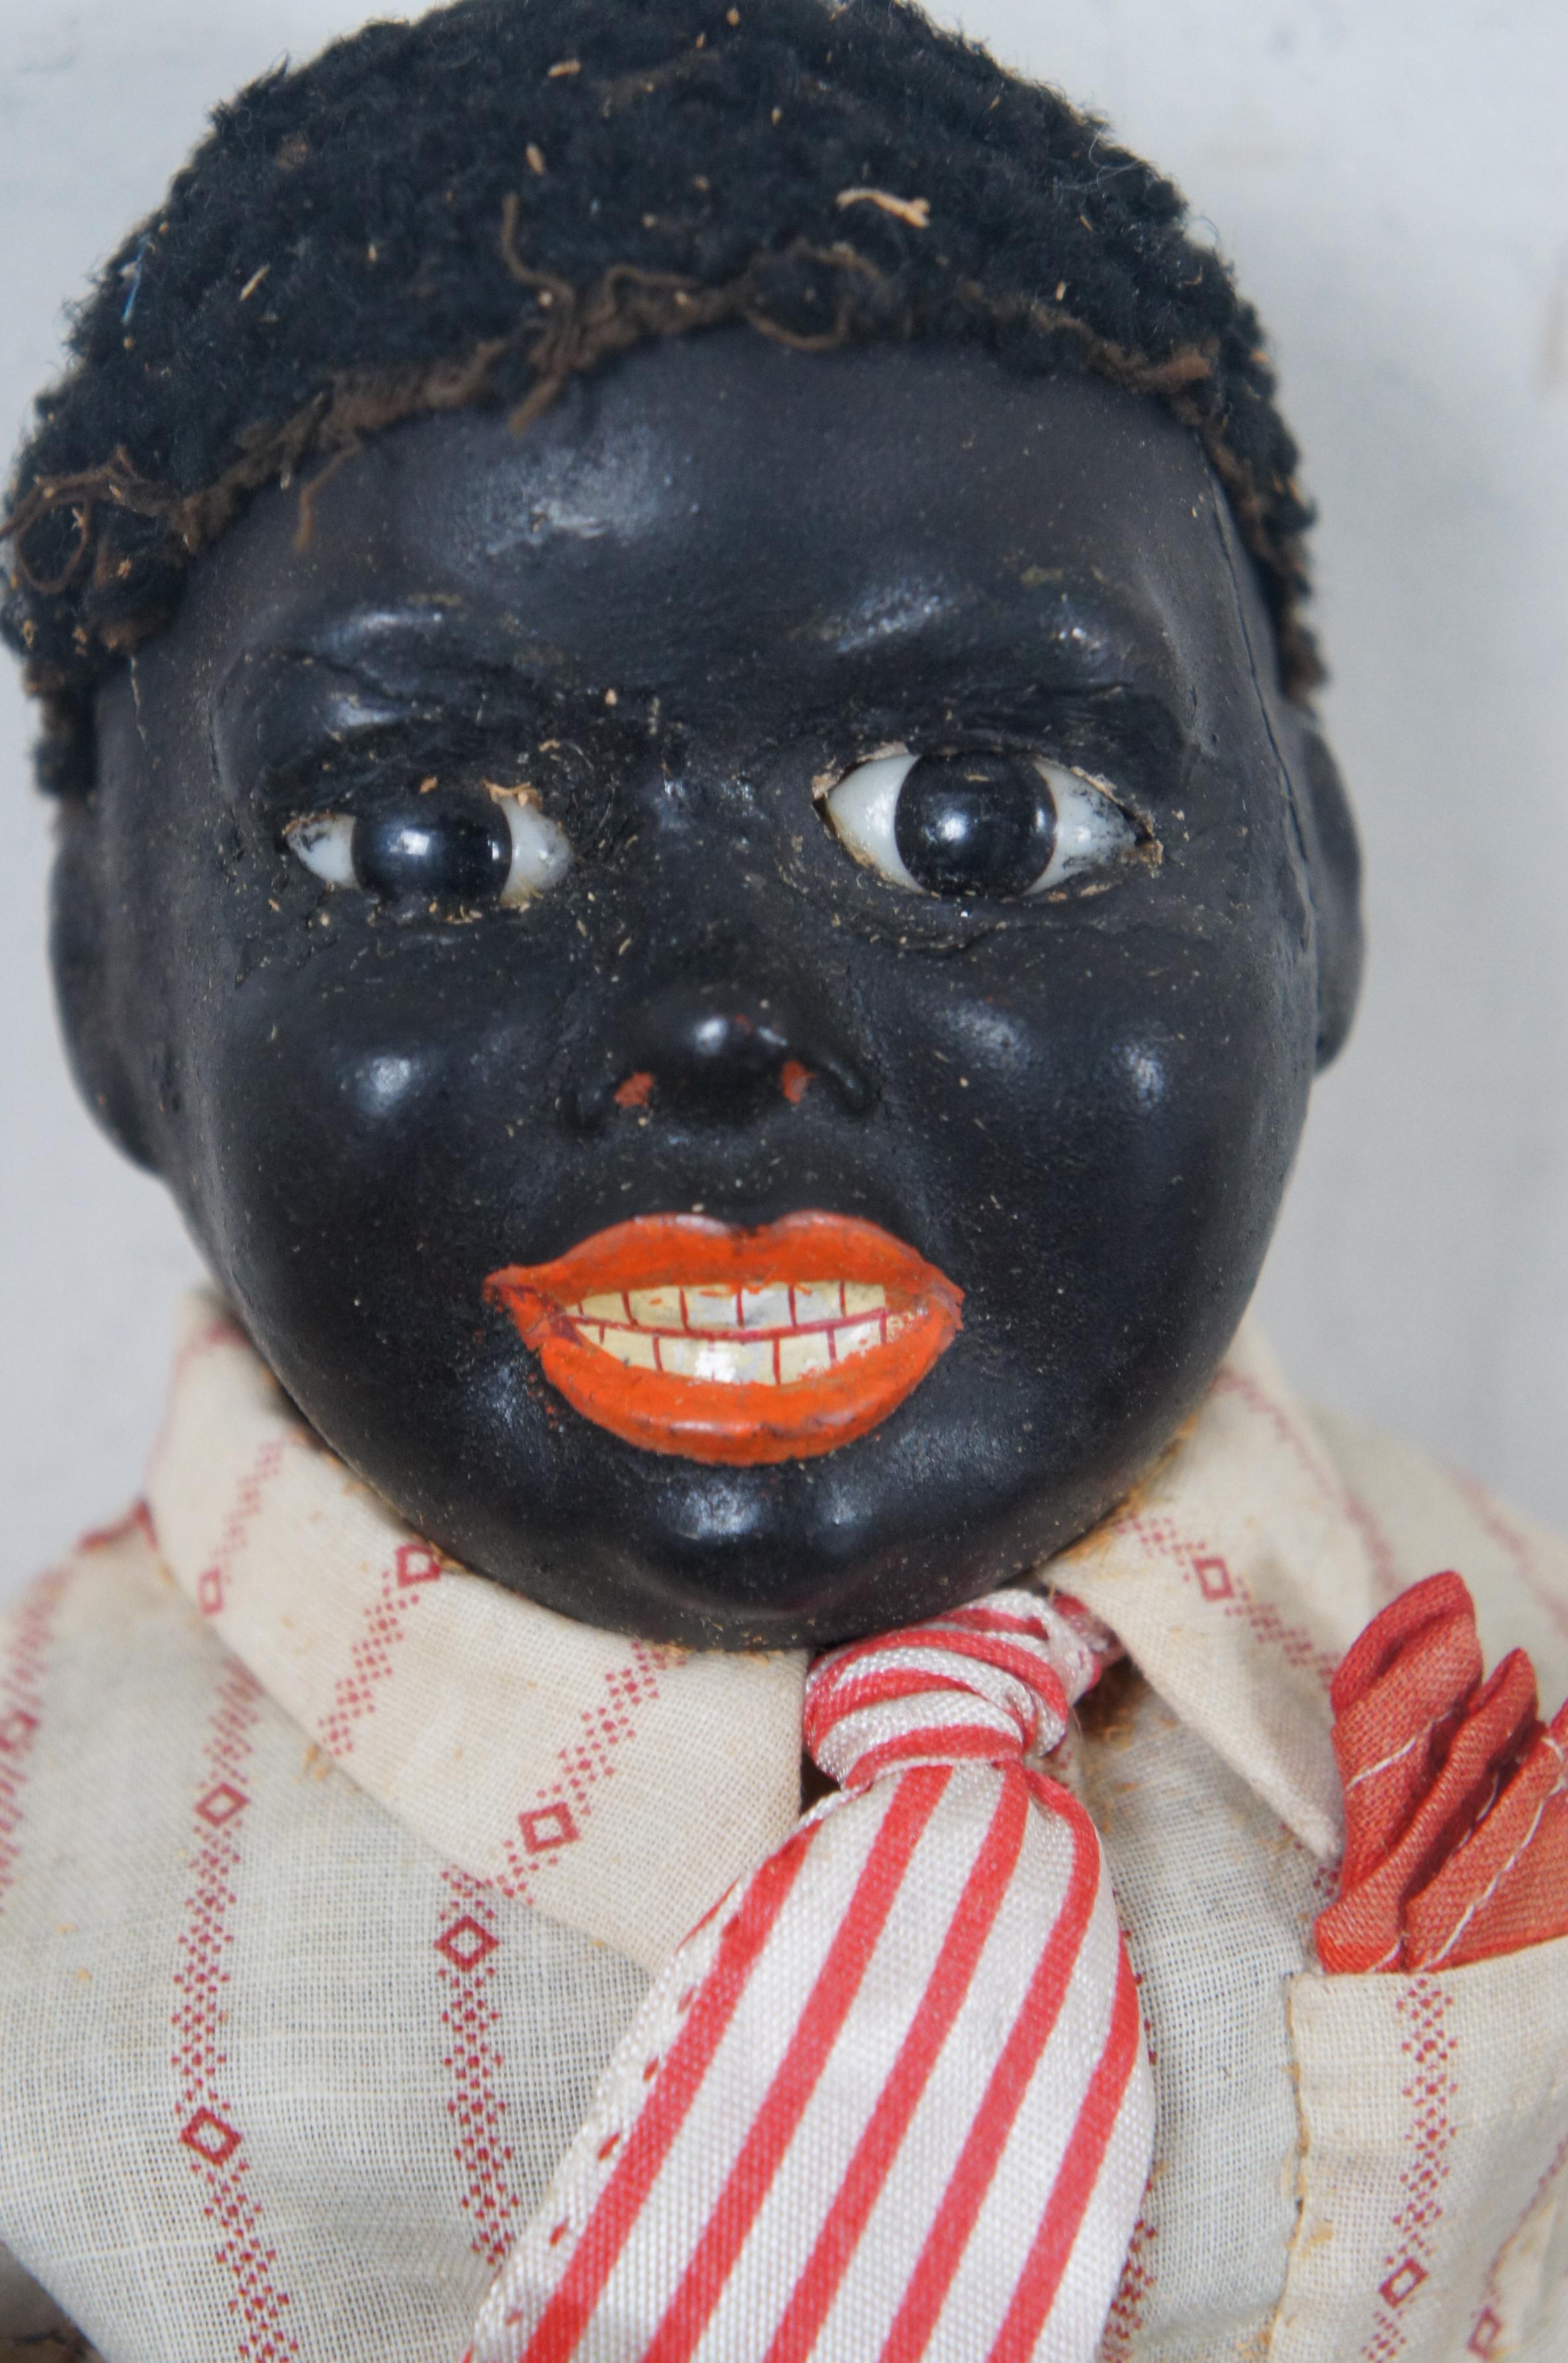 Ceramic Antique German Bisque Black Ebony Young Boy Character Doll Cloth Body